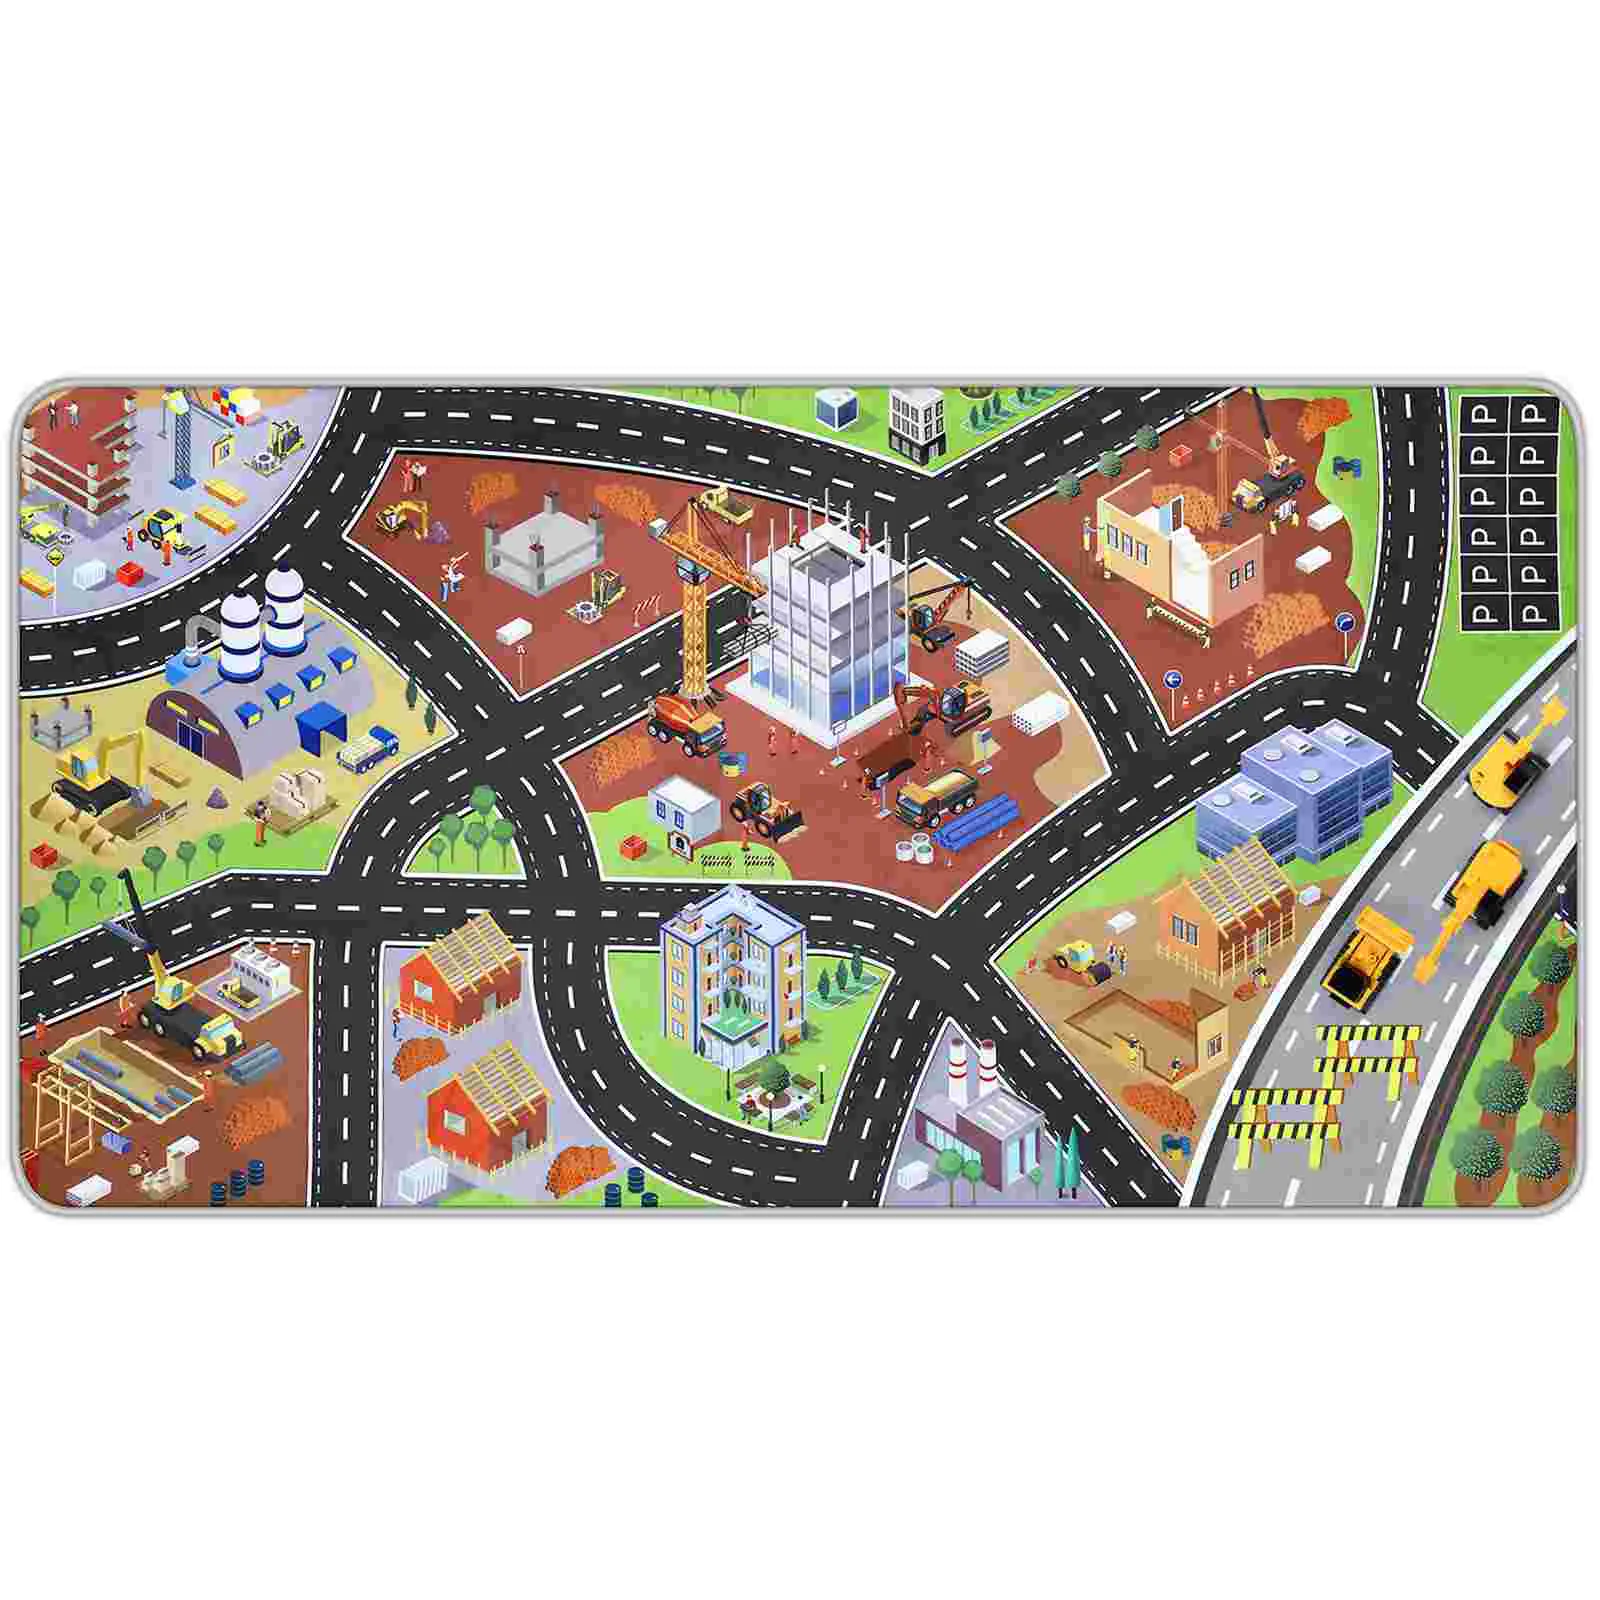 

Kids Play Mat Rug Carpet Playmat for Cars and Train, Car Rug Play Mat Crawling Role Rug Playing Rug 67x 35